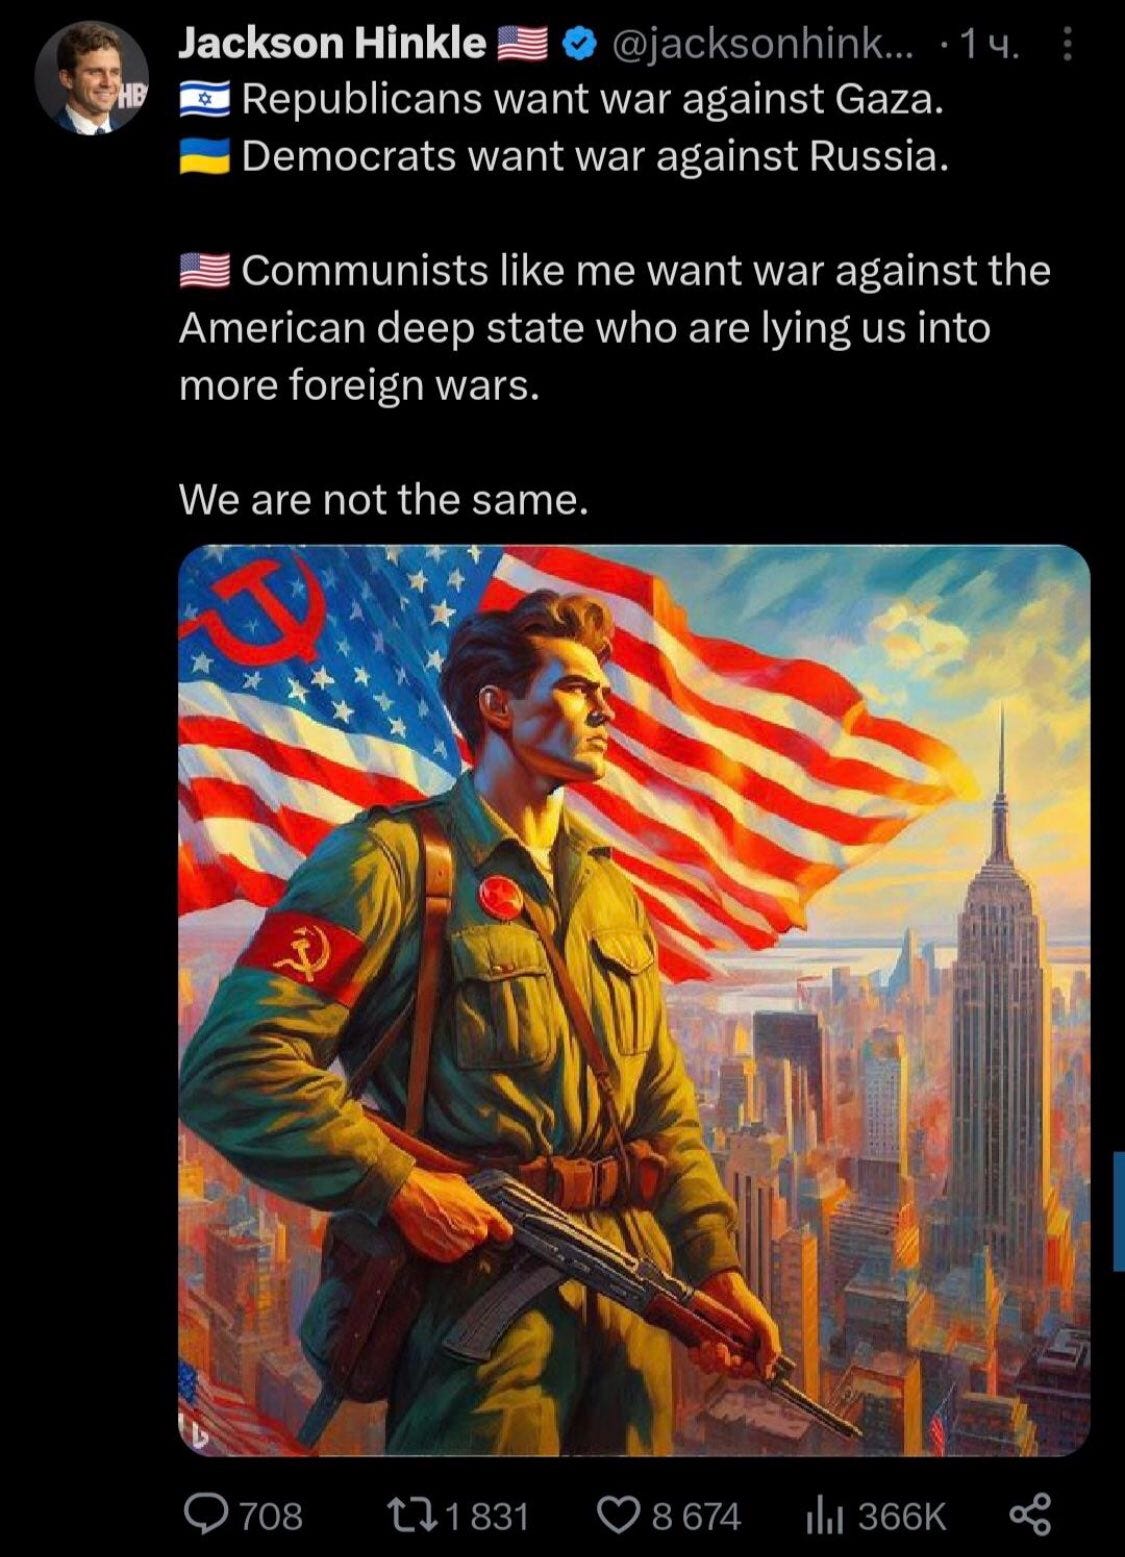 Jackson Hinkle tweeted Republicans want war against Gaza. Democrats want war against Russia. Communists like me want war against the American deep state who are lying us into more foreign wars. It included an AI generated image of him in a communist outfit overlooking the skyline of New York City.